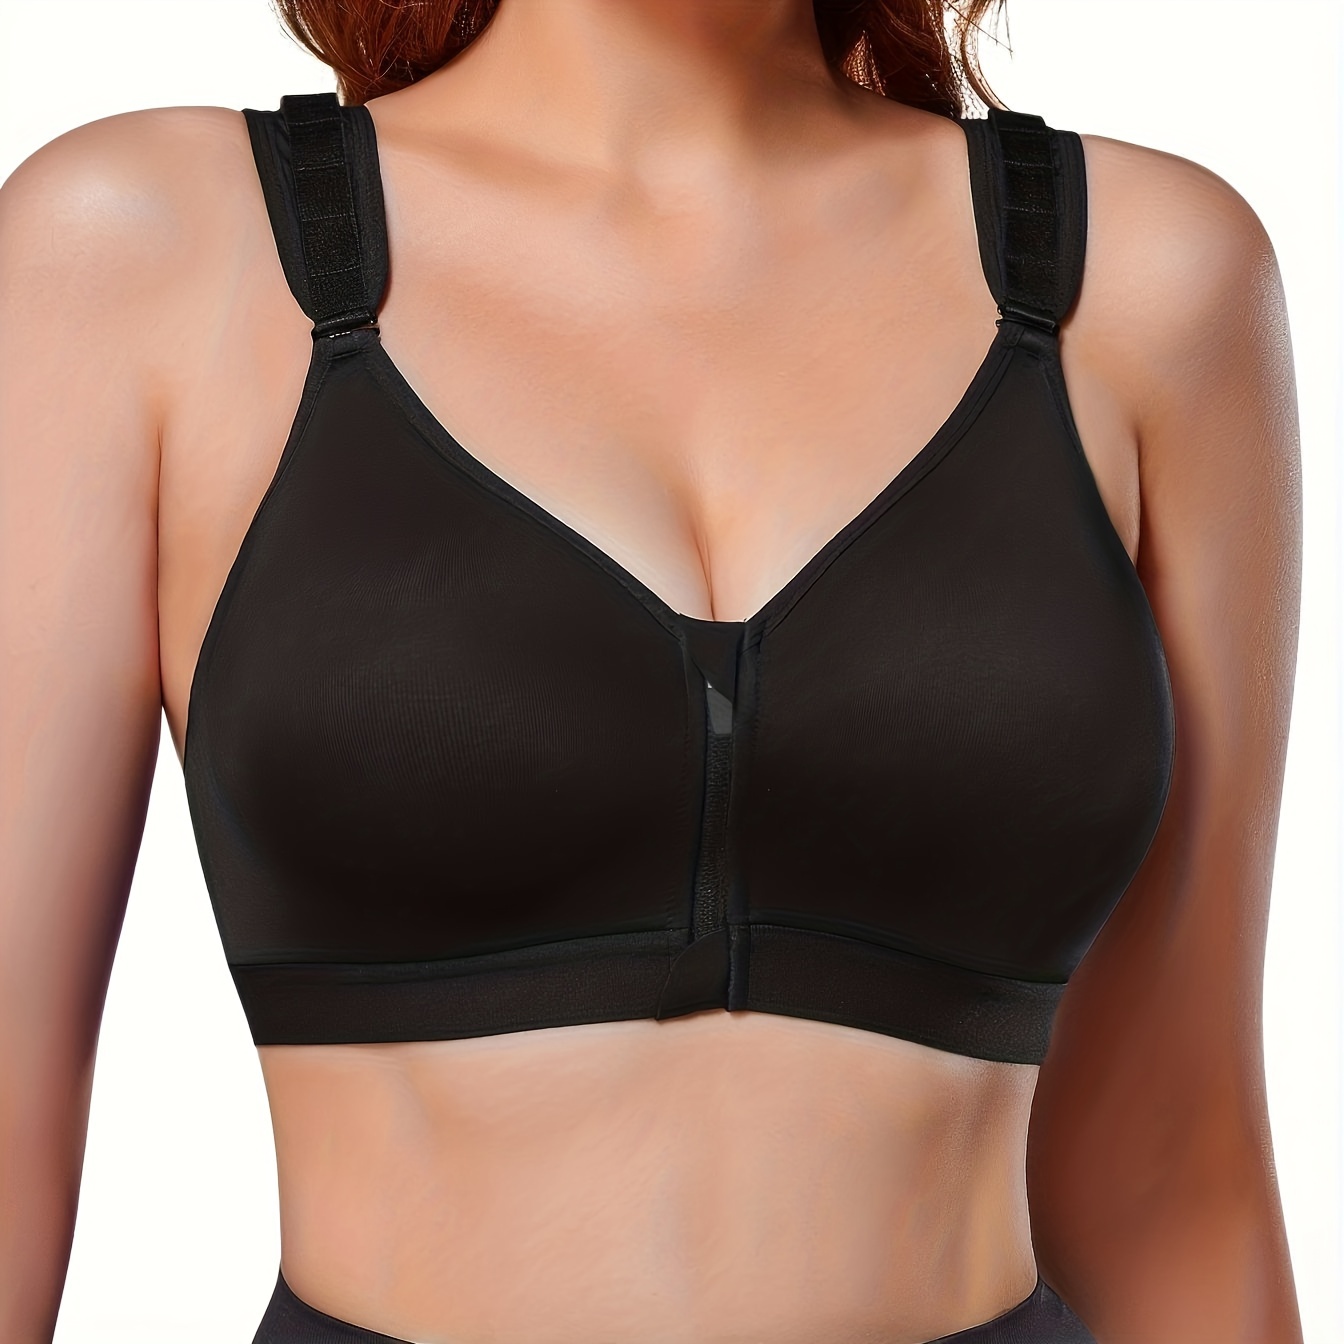 Shapeupstores Doctor-Recommended Post-Surgical Wireless Bra with